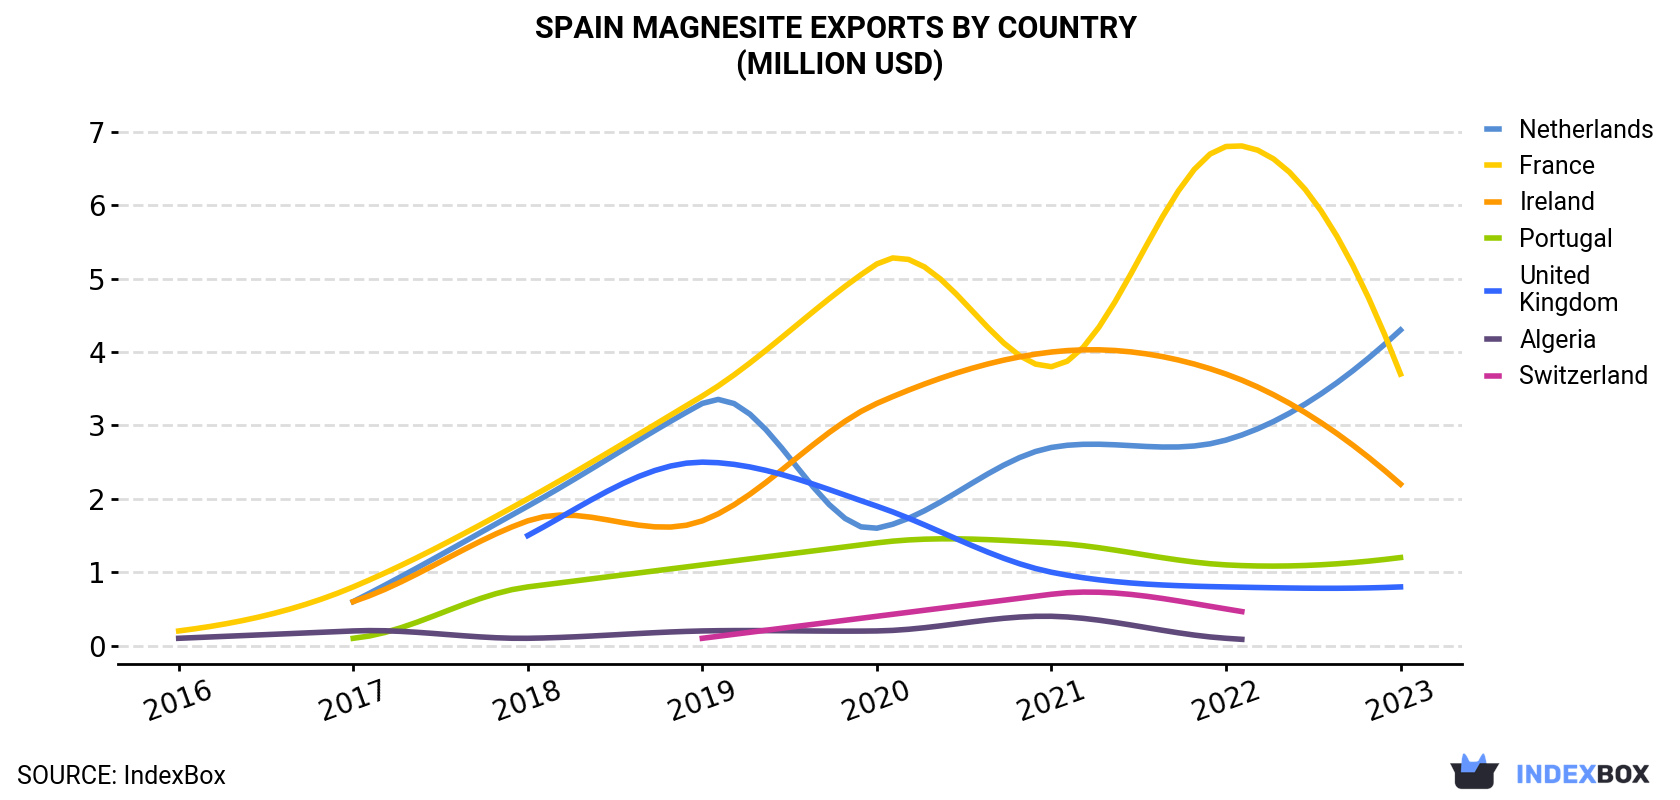 Spain Magnesite Exports By Country (Million USD)